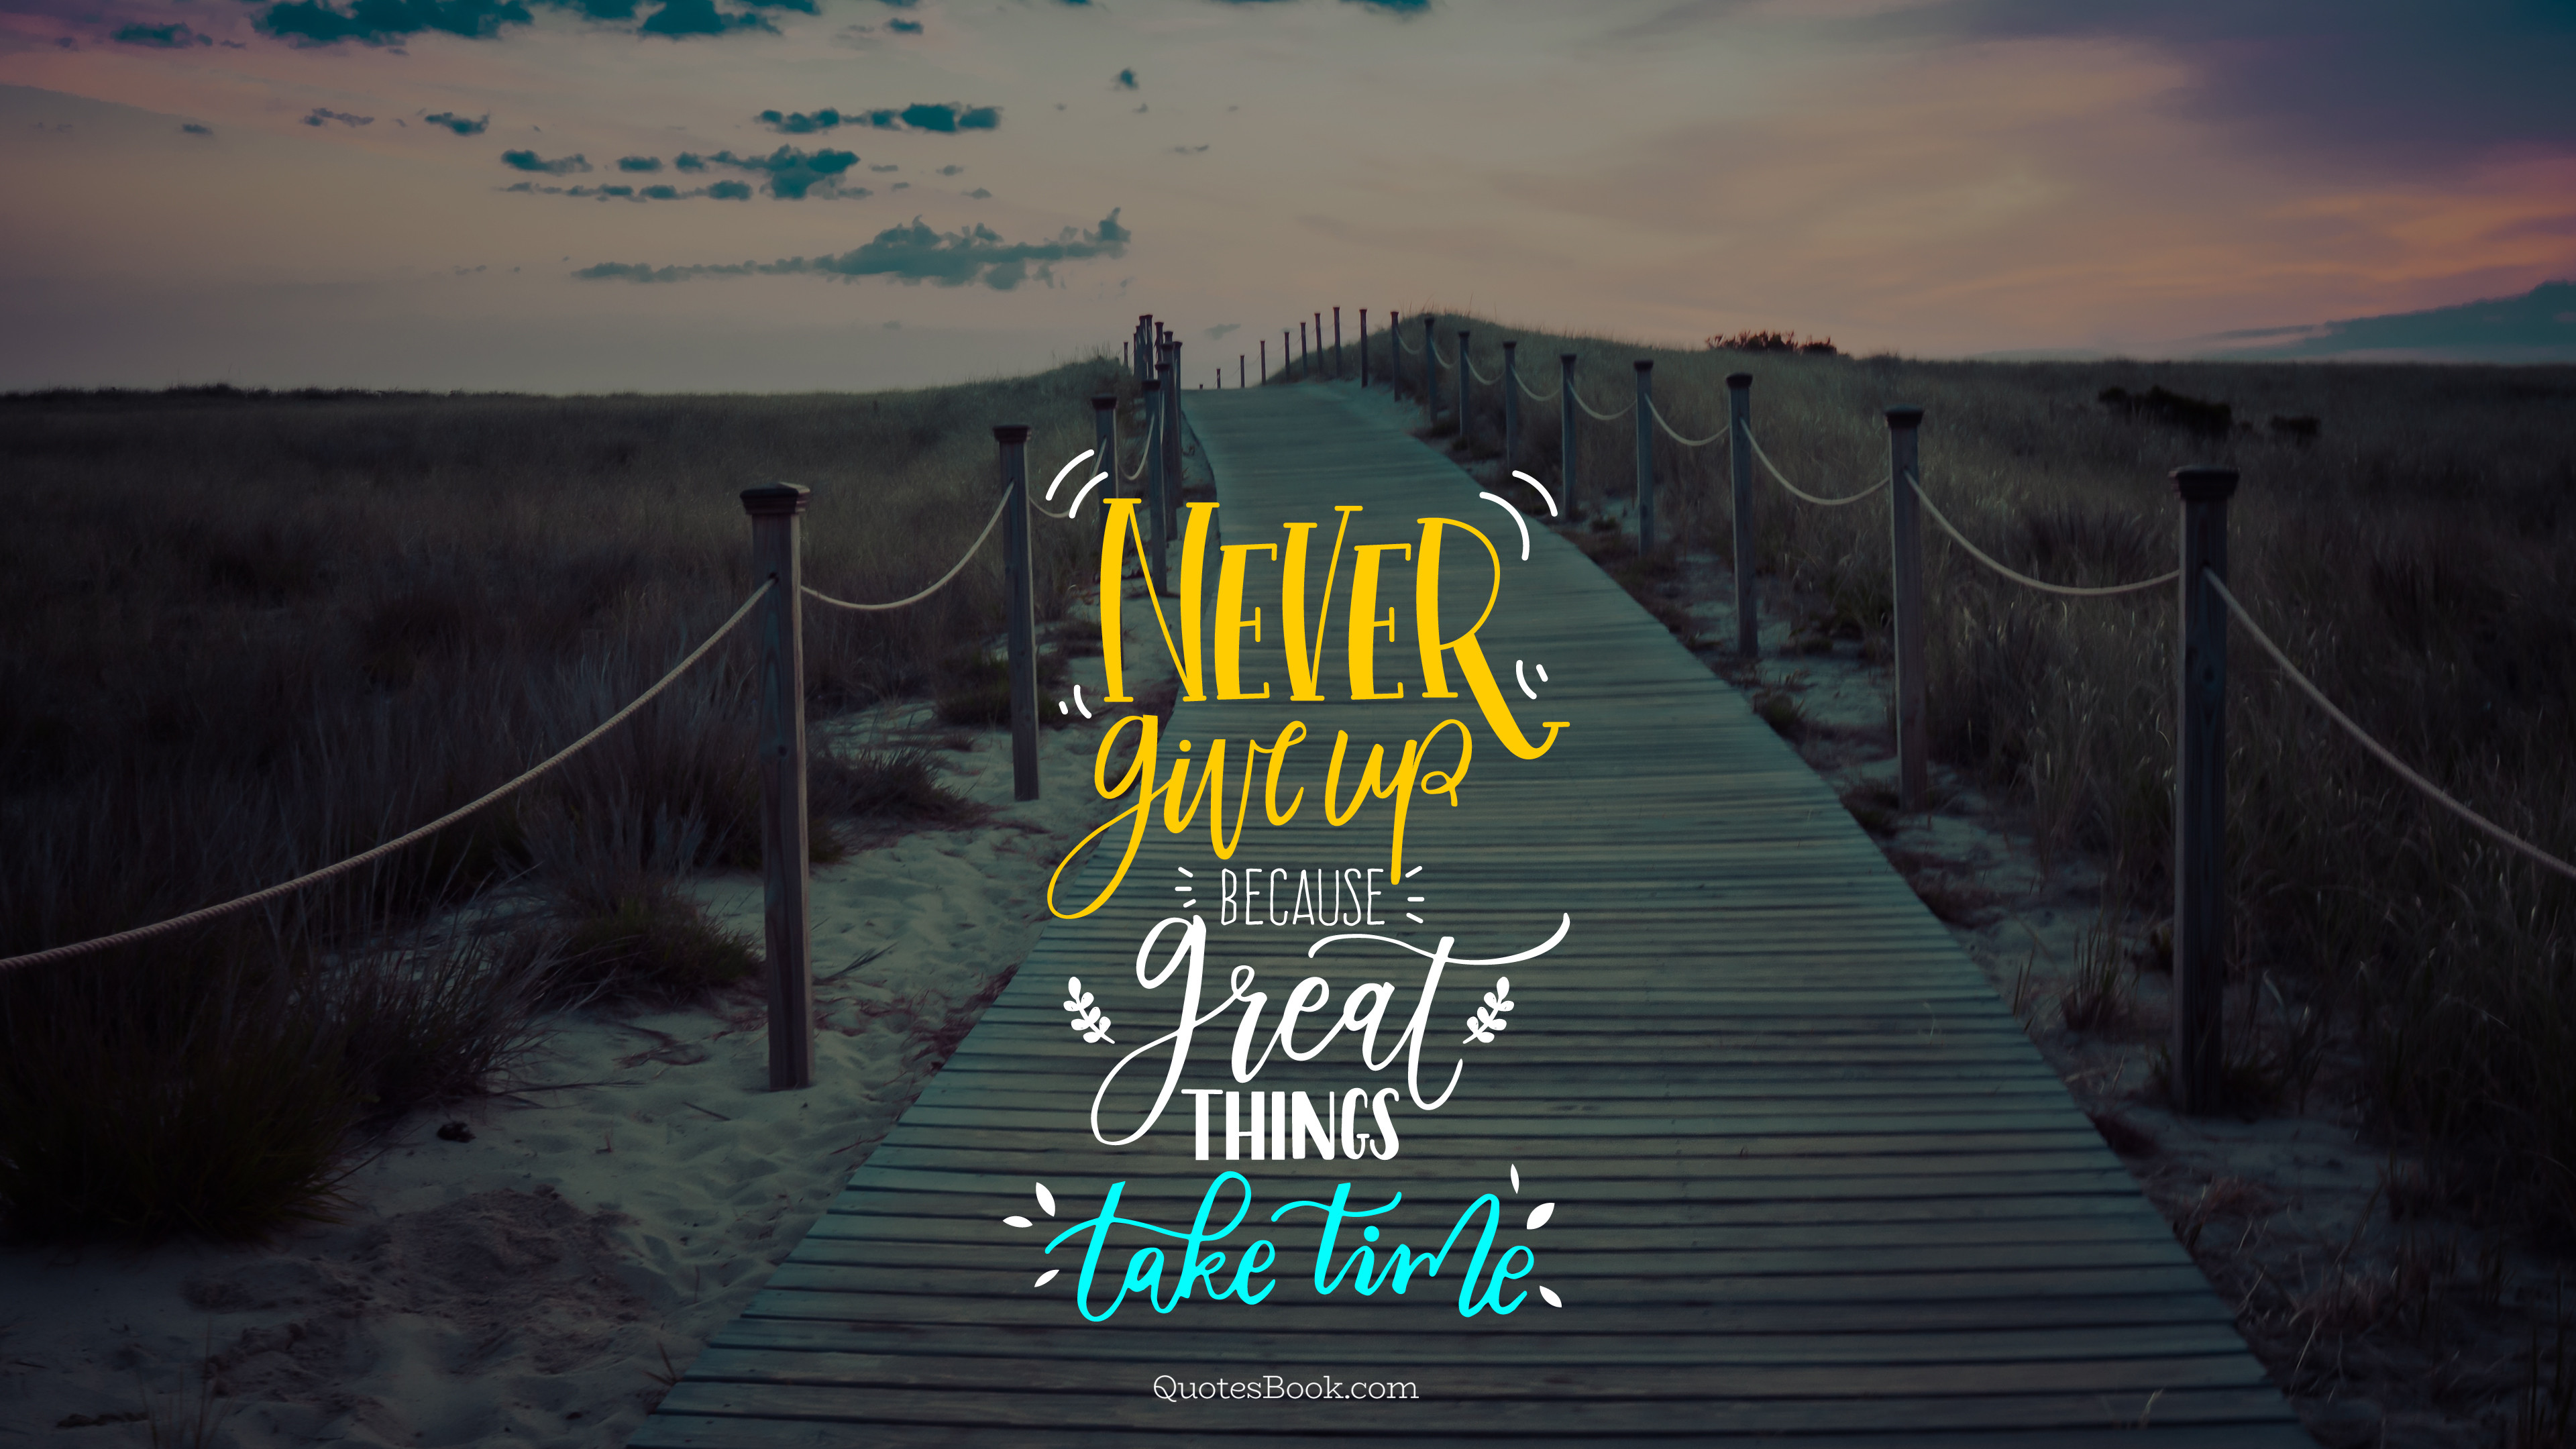 Never give up because great things take time QuotesBook